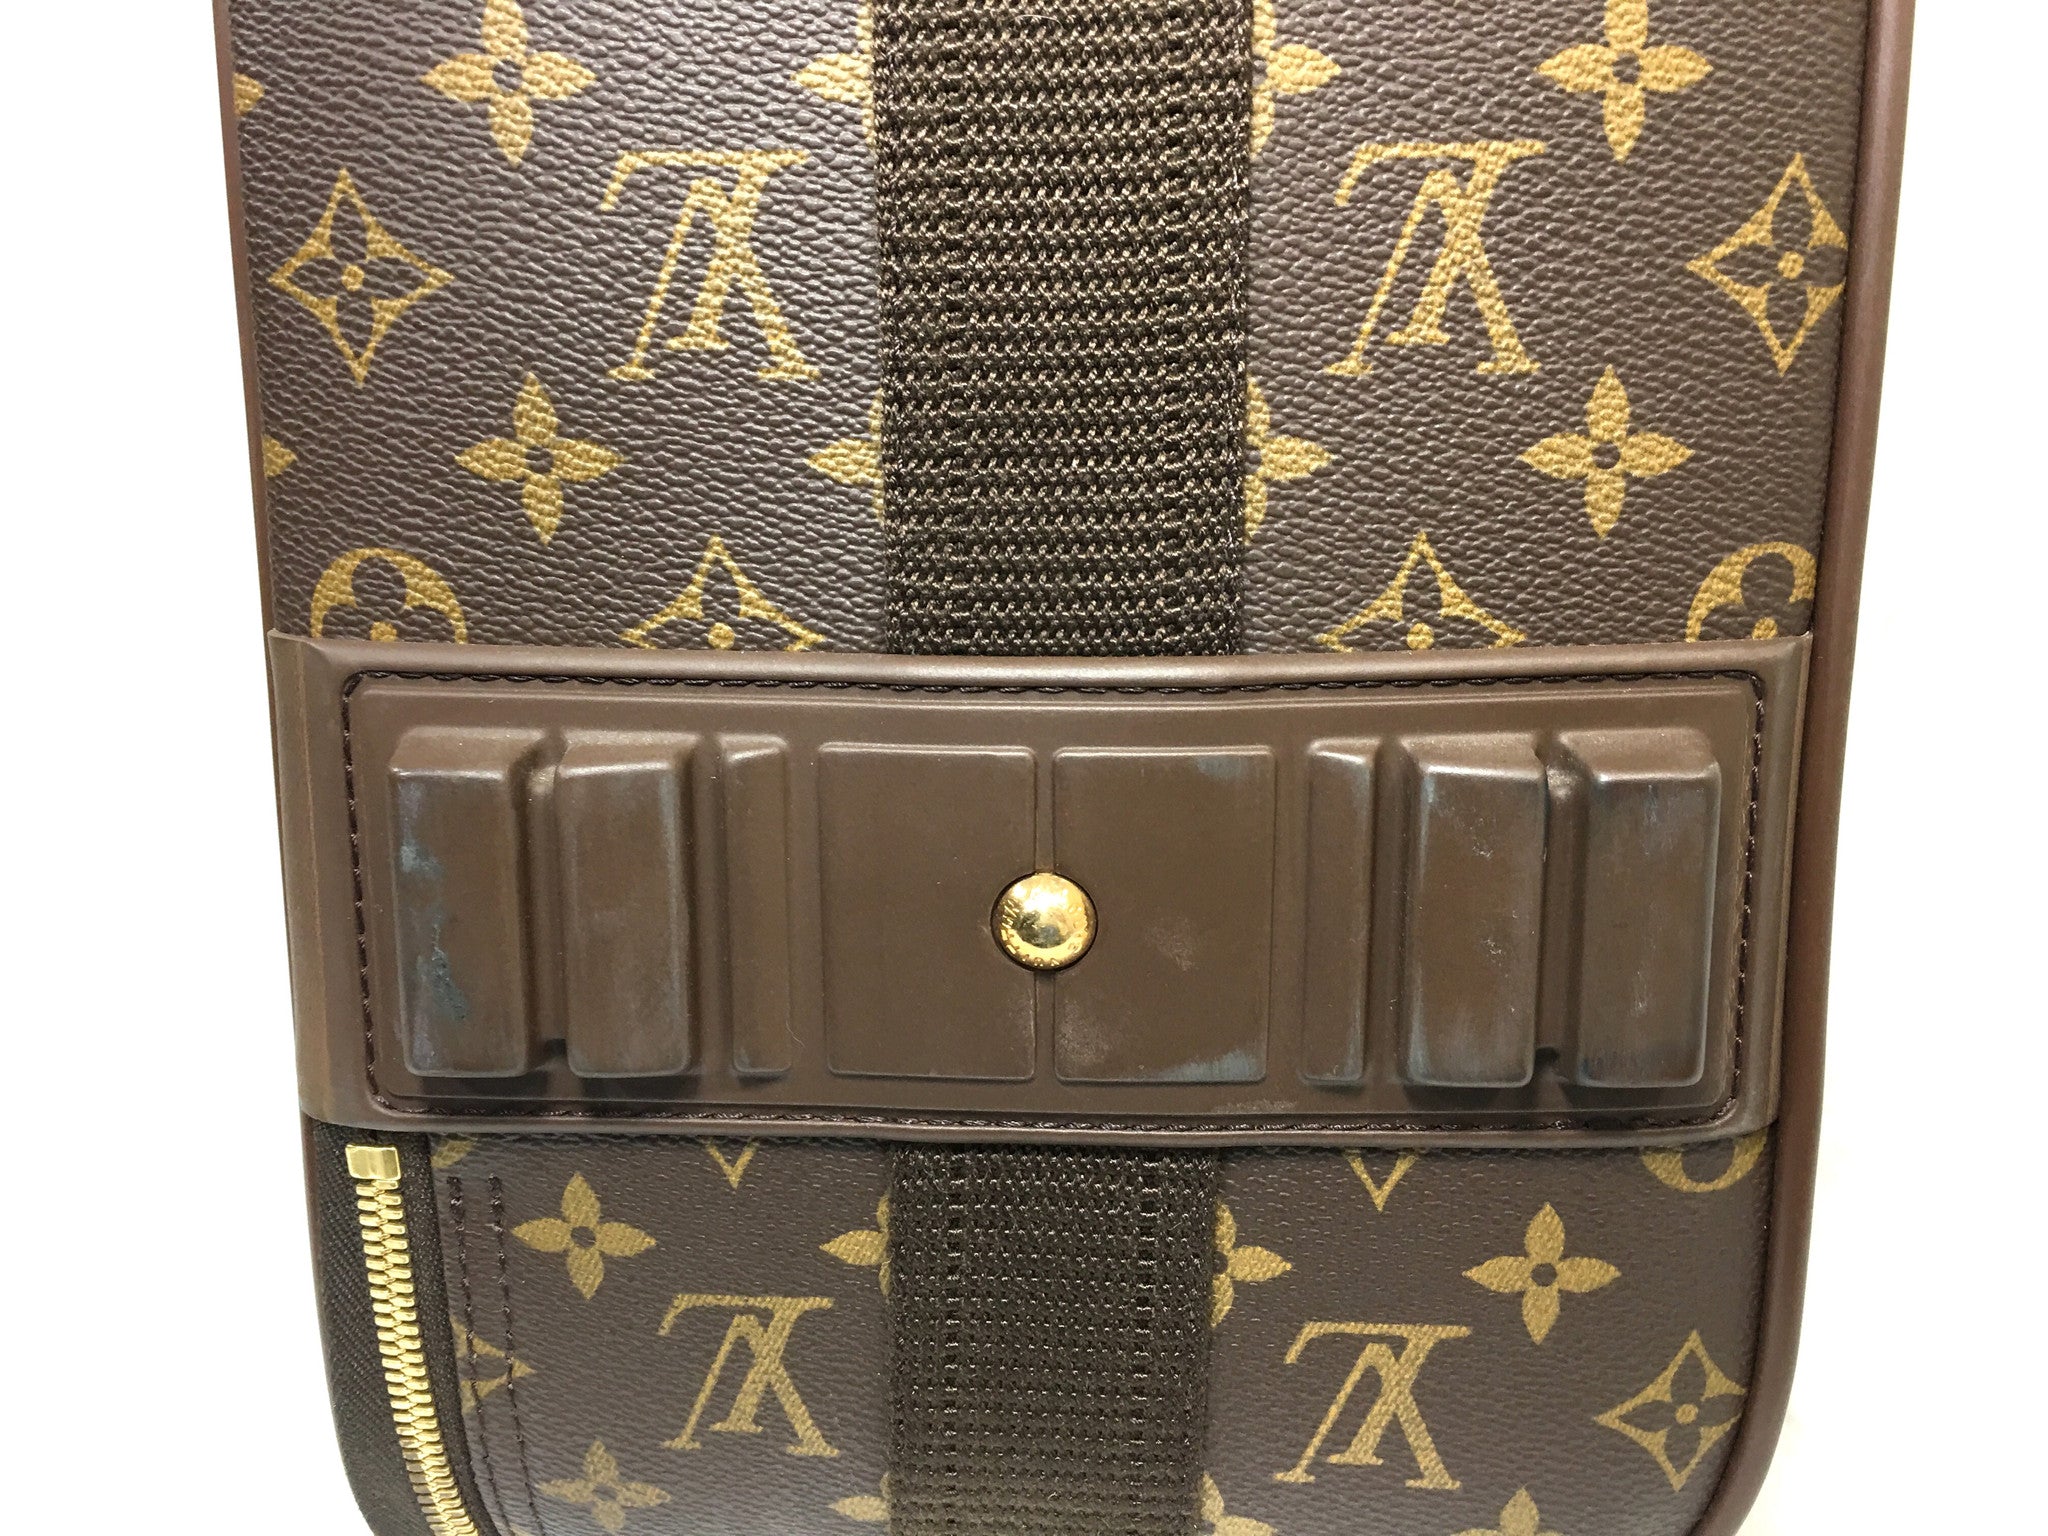 Louis Vuitton Pegase 55 monogram rolling luggage / online and in shop 12-6  #louisvuittonpegase . . TAP this post for additional photos…